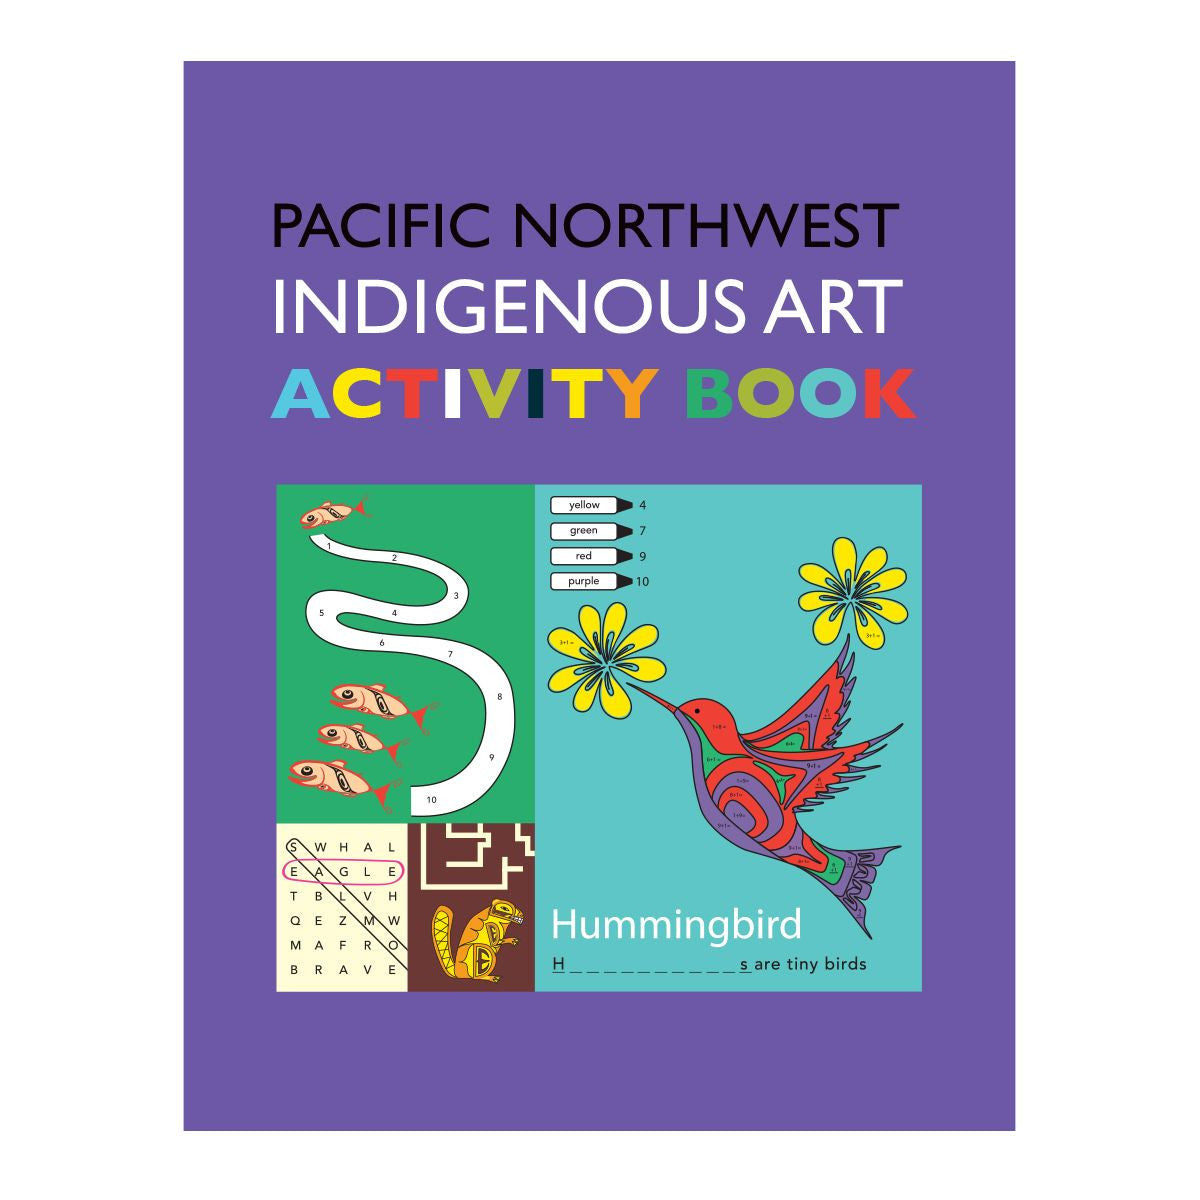 Activity Book | Pacific Northwest Indigenous Art Activity Book by Various Artists